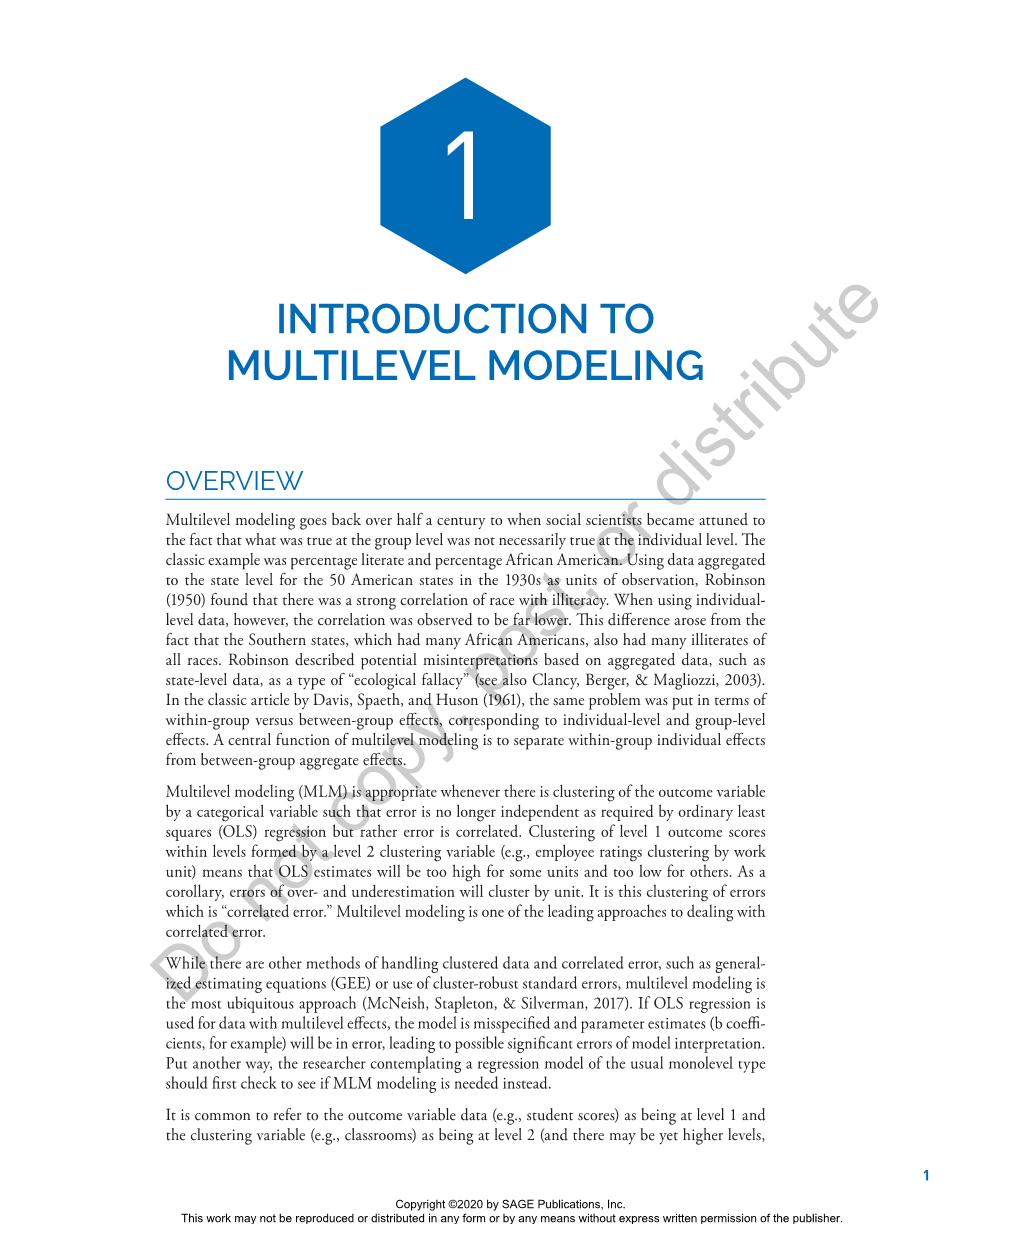 Introduction to Multilevel Modeling